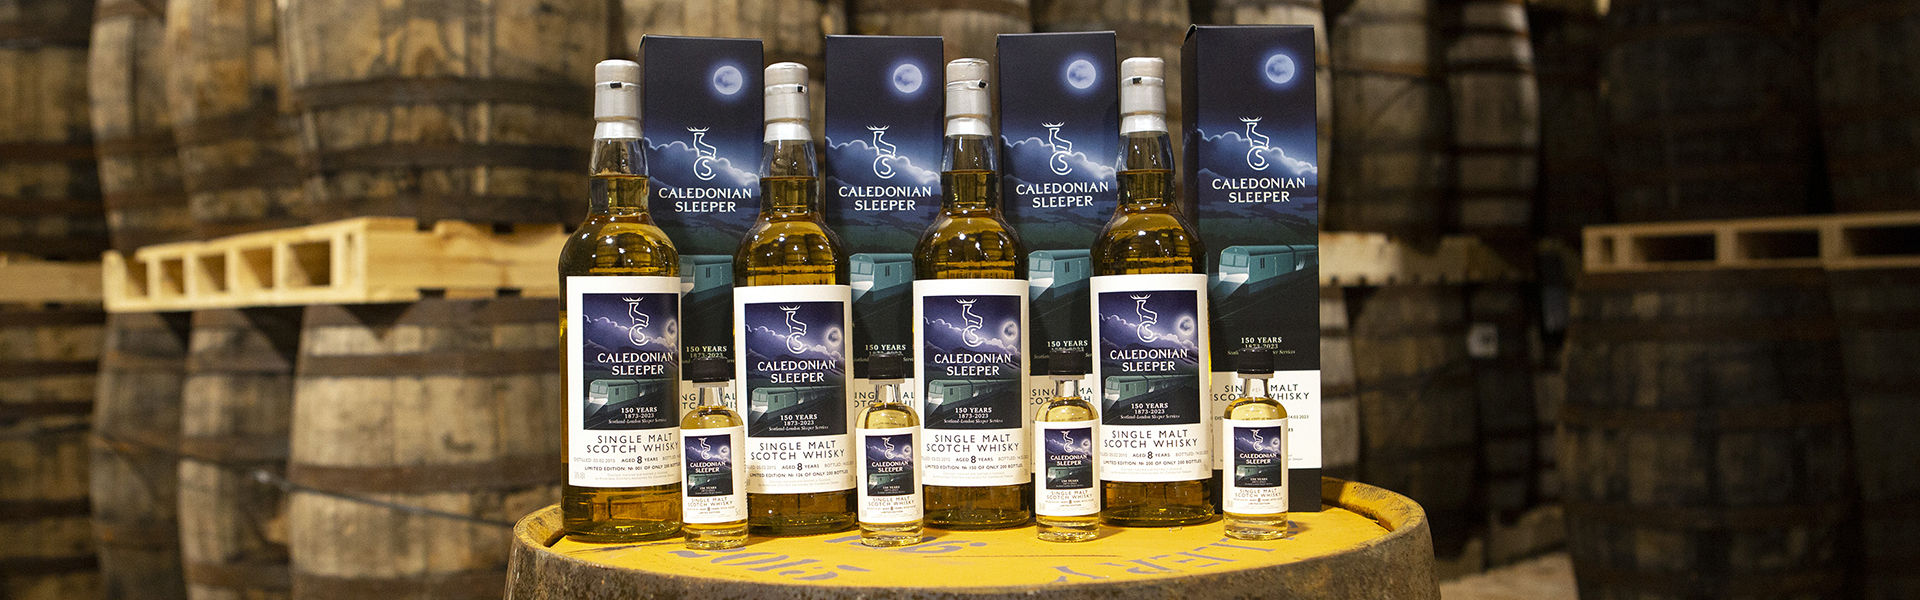 Win a bottle of Caledonian Sleeper’s 150th Anniversary Whisky with Give a Dog a Bone